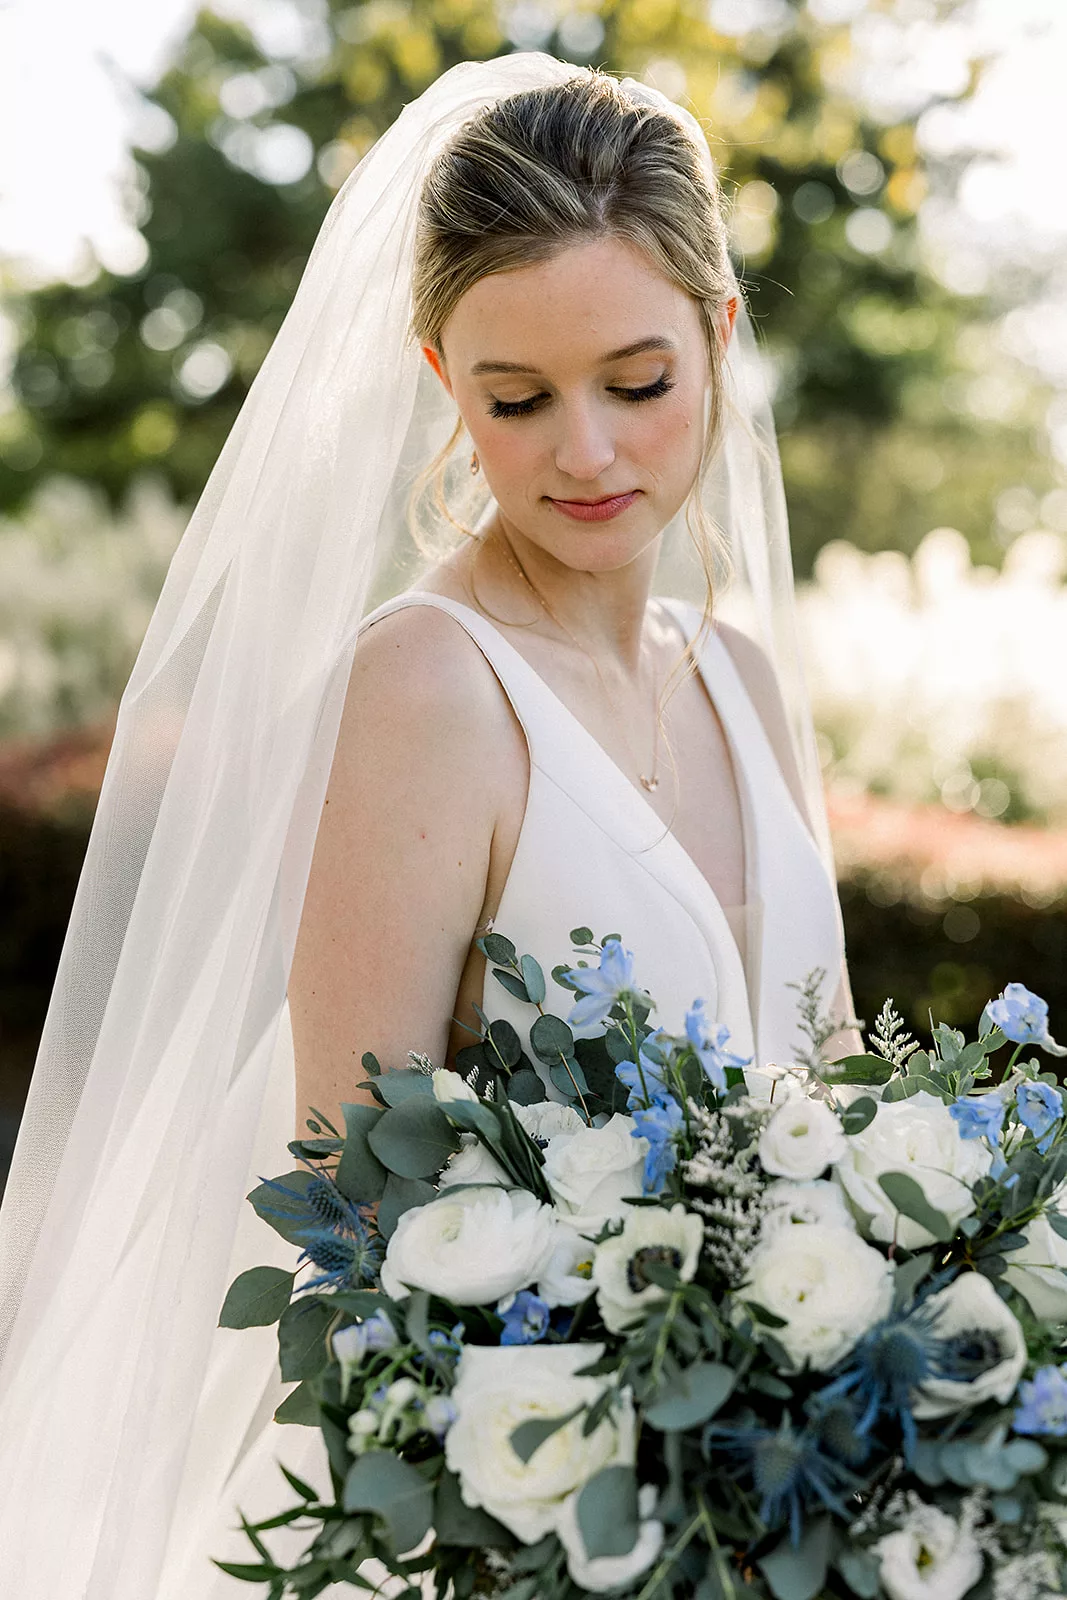 A bride looks down at her blue and white florals in her hand at a Curahee Club Wedding